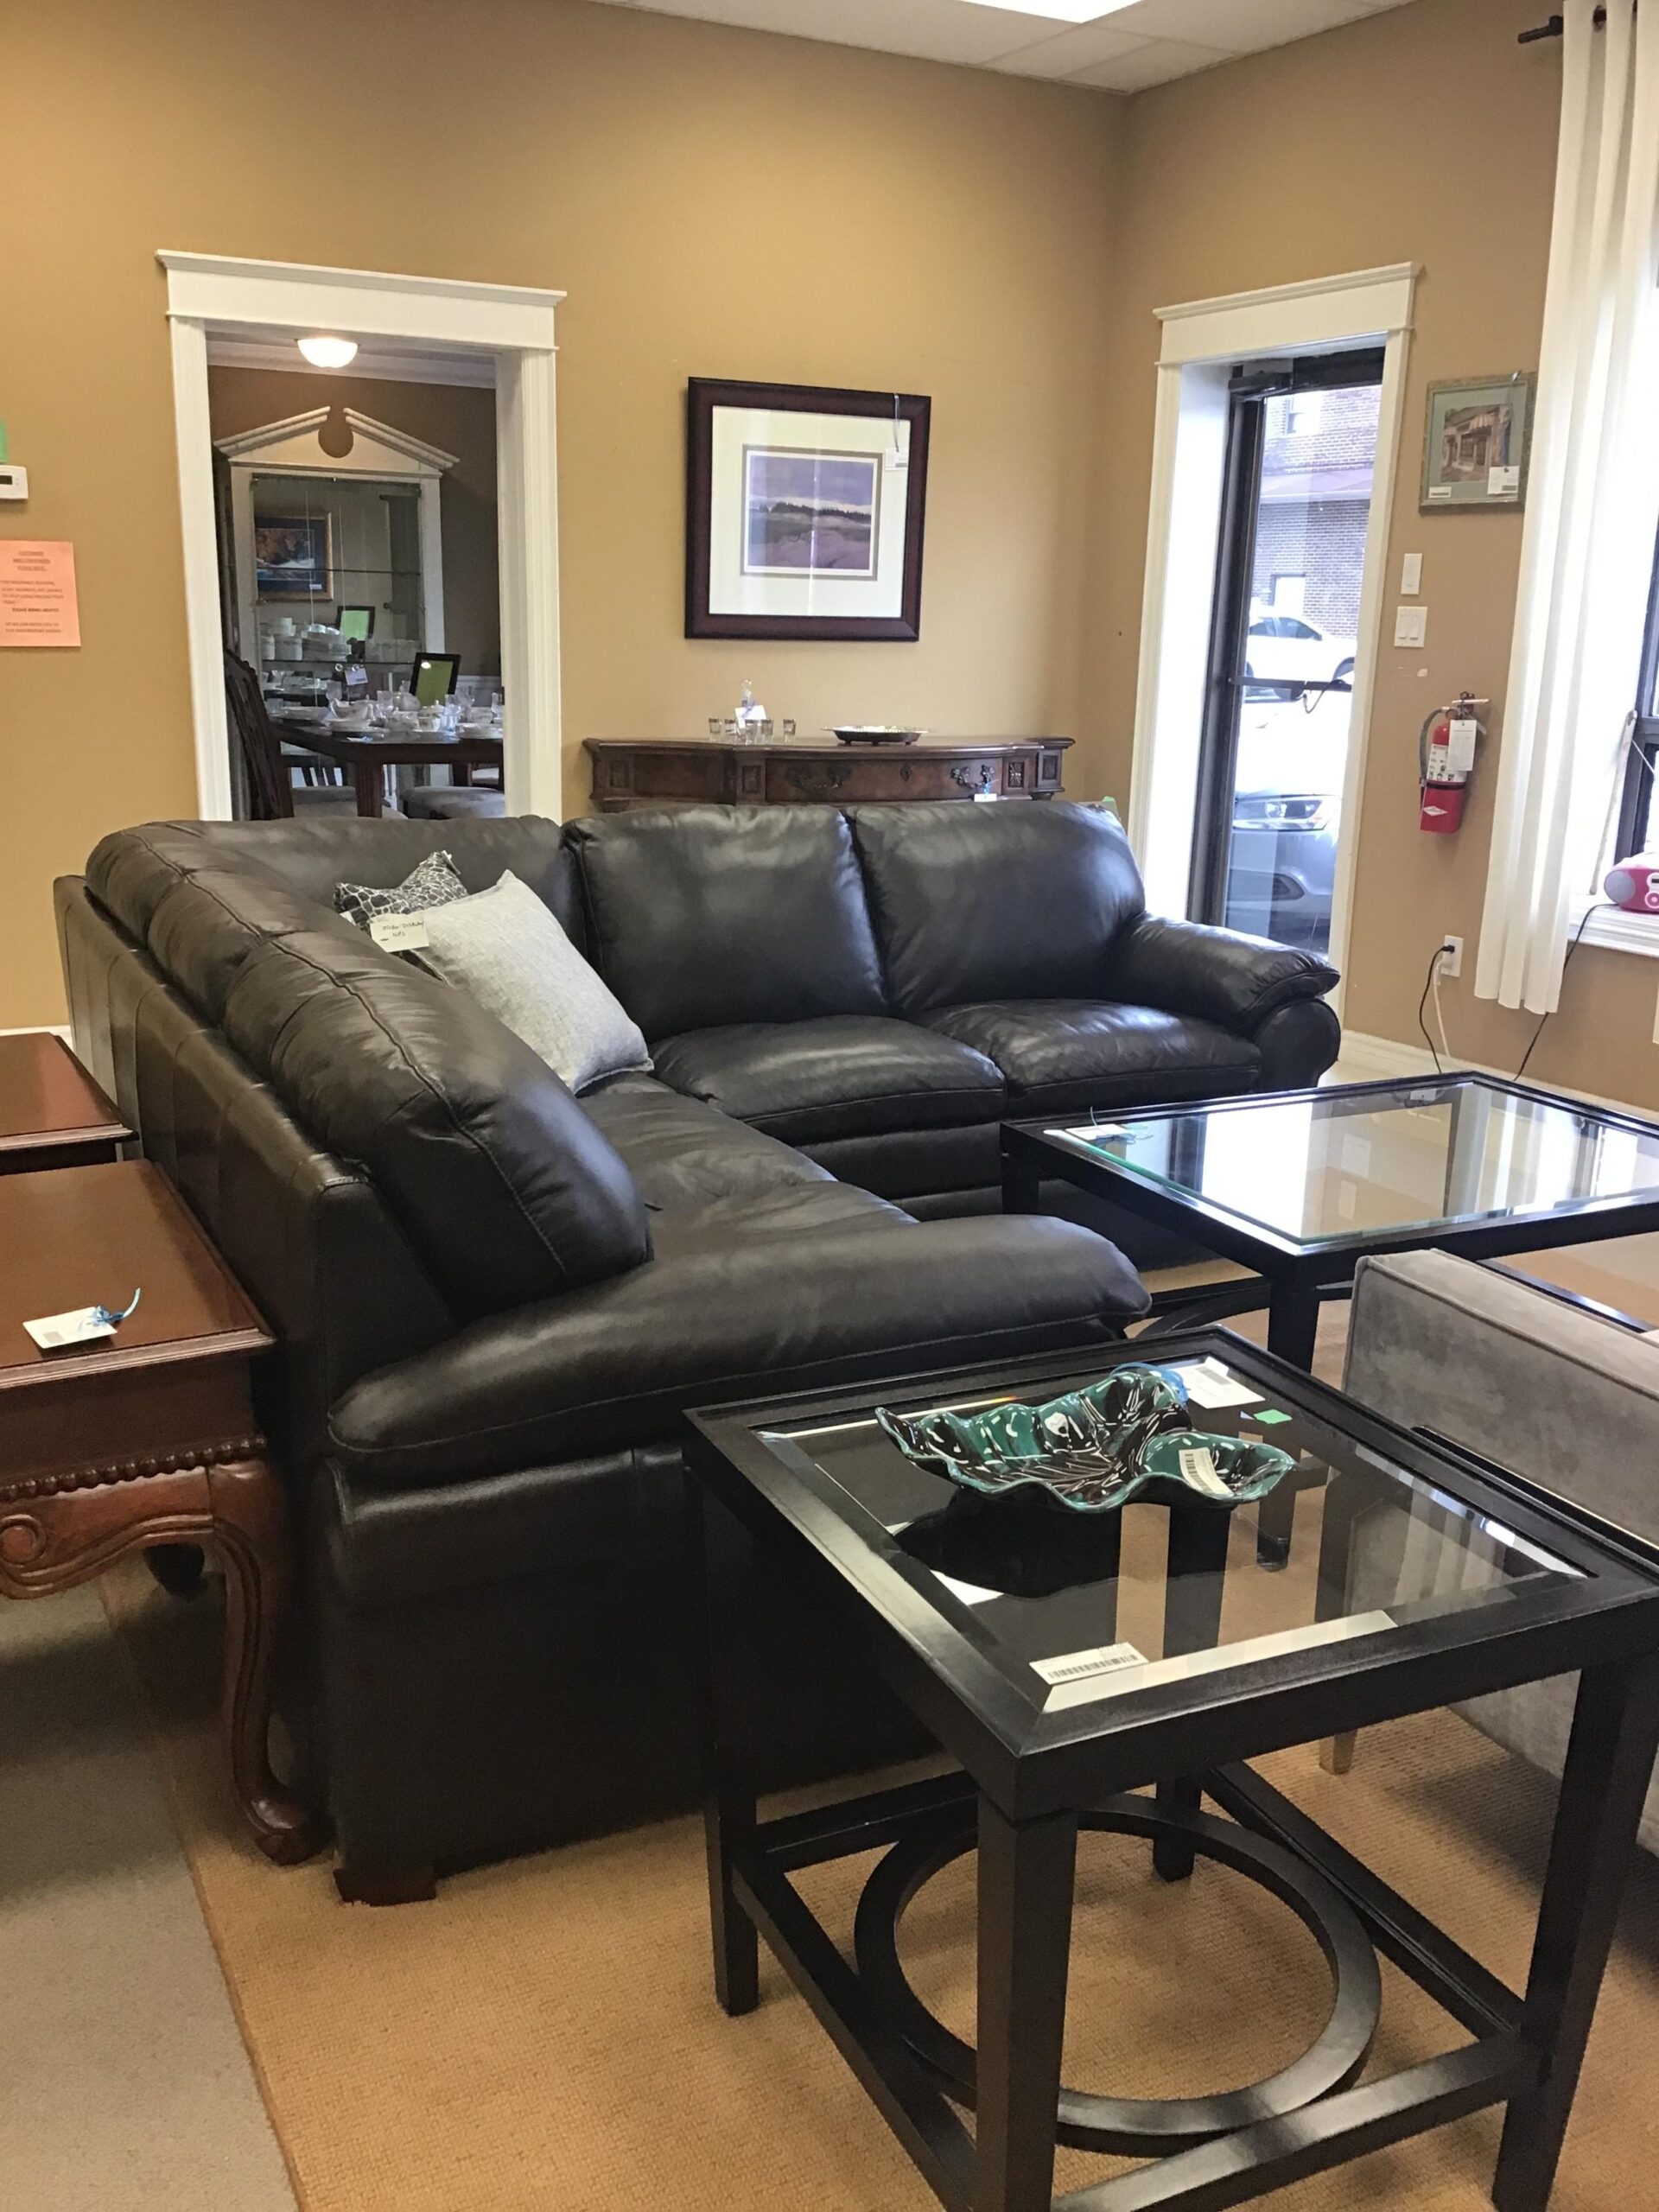 2PC Leather Sectional